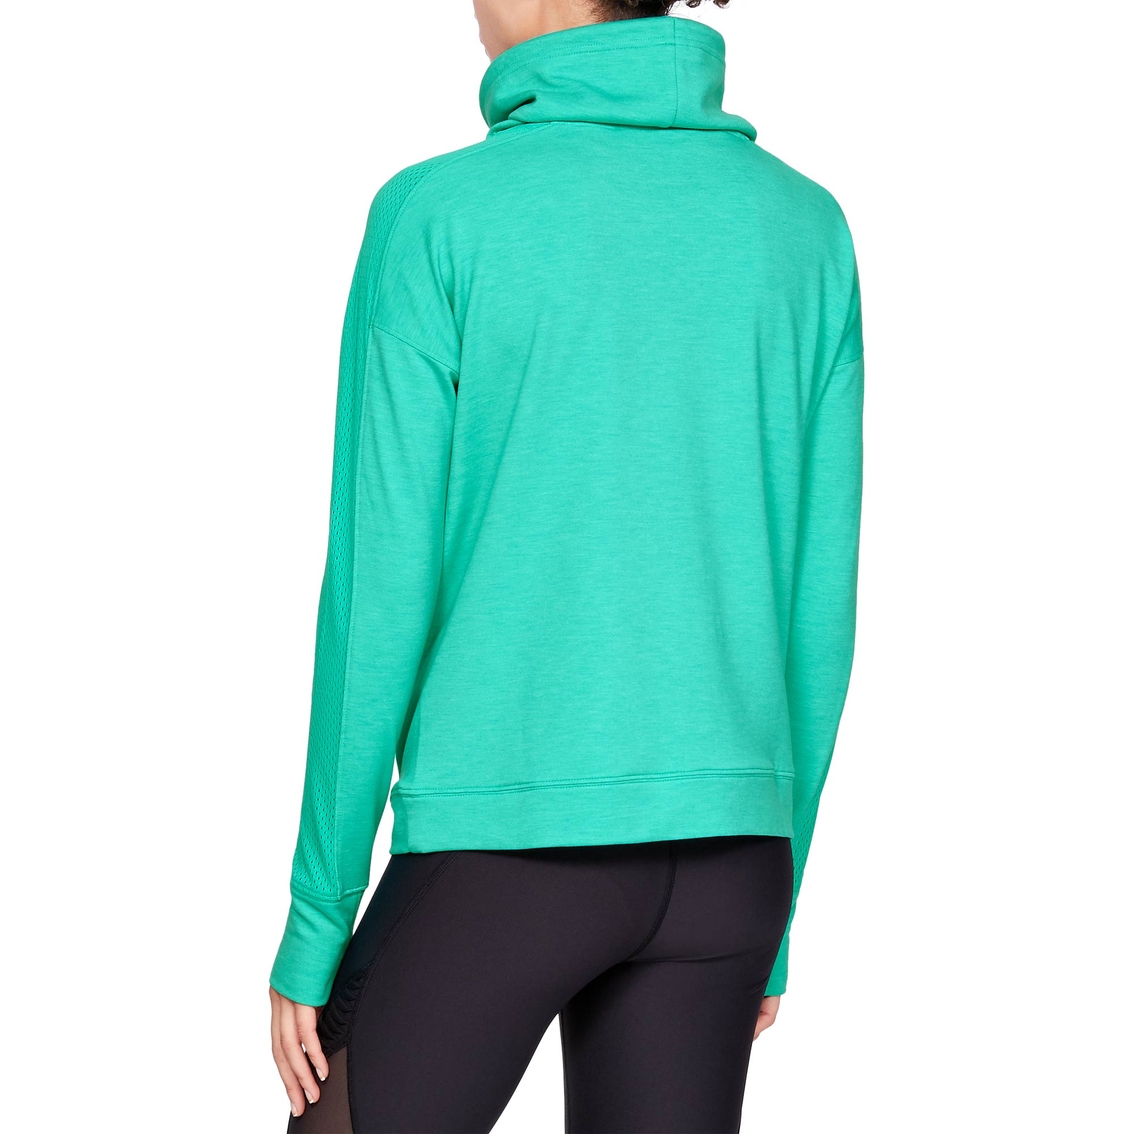 Under Armour Featherweight Funnel Neck Fleece - Image 2 of 5